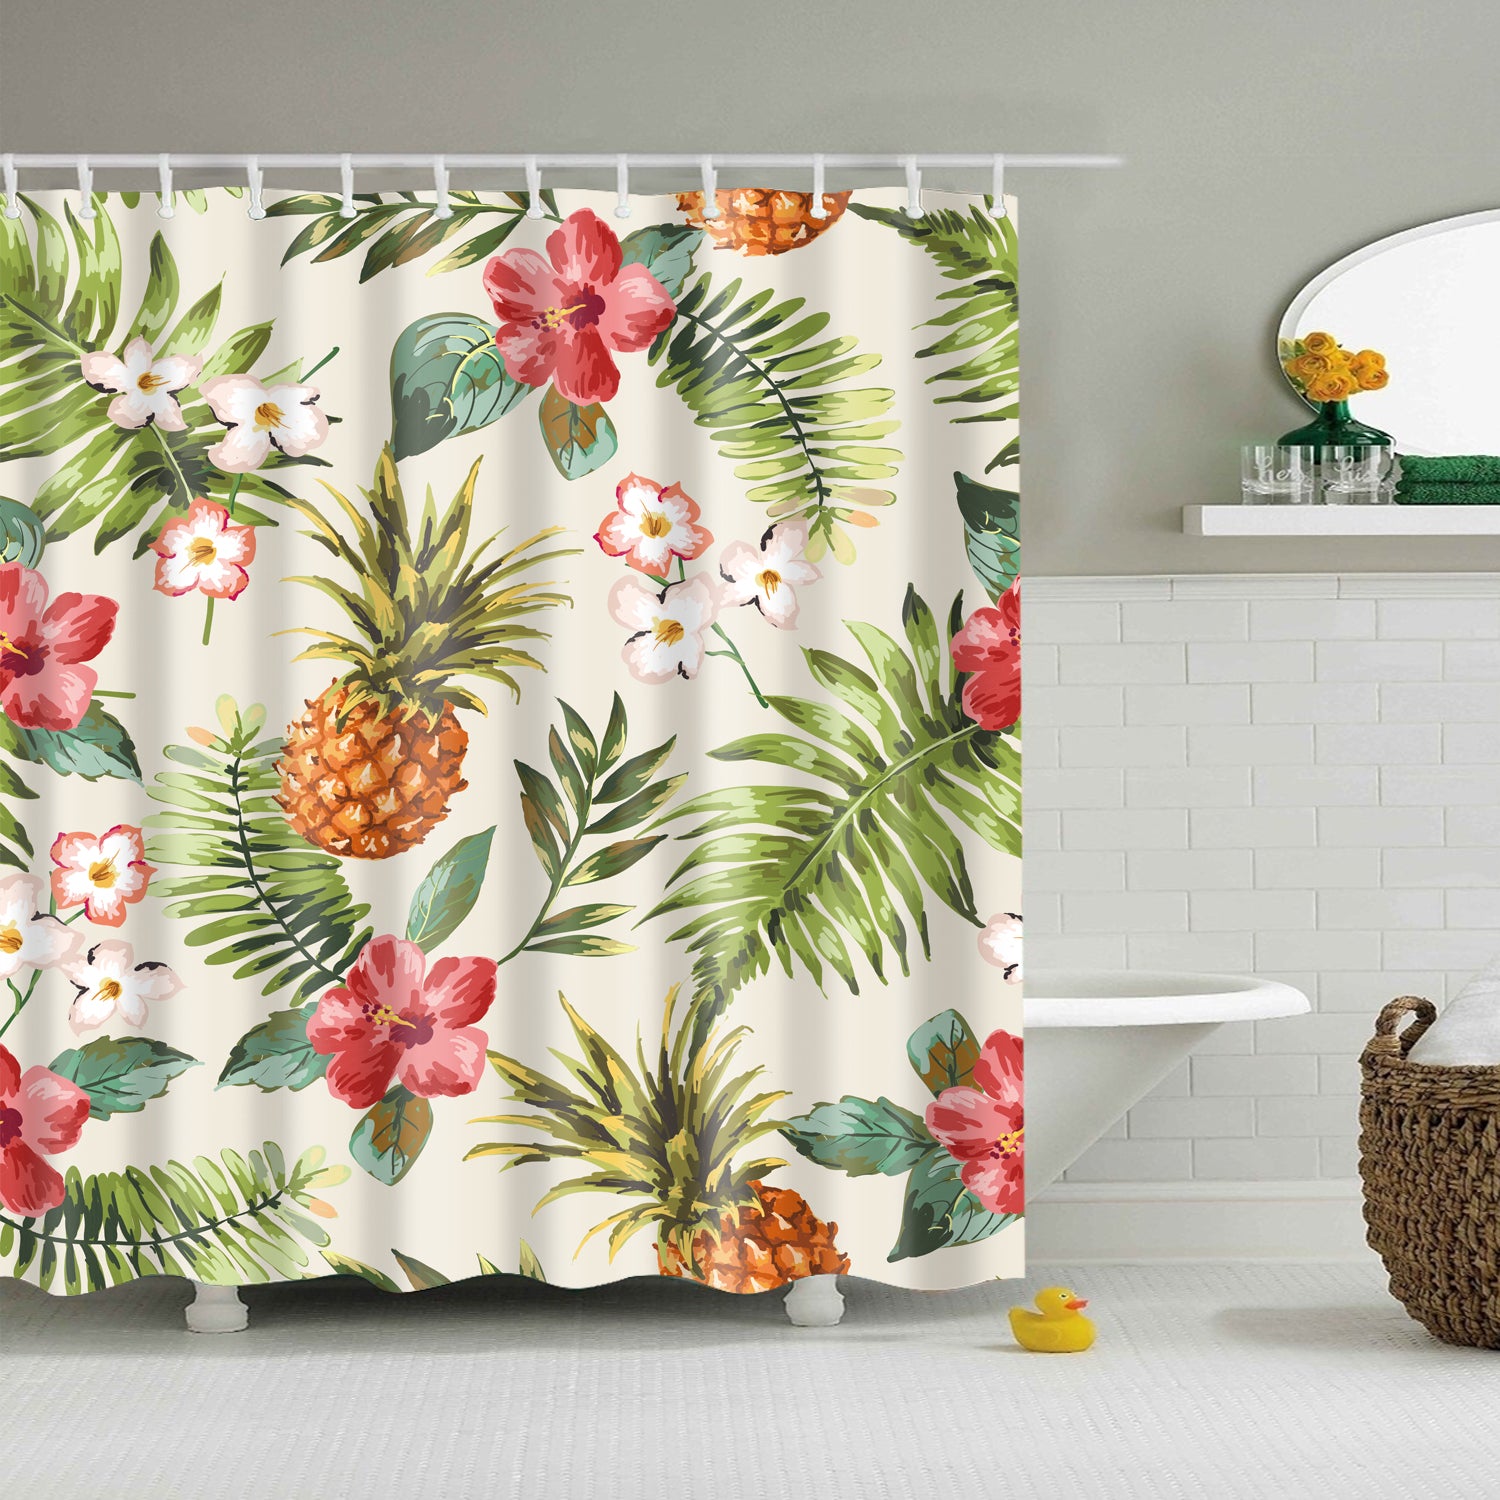 Tropical Flowers with Pineapple Shower Curtain